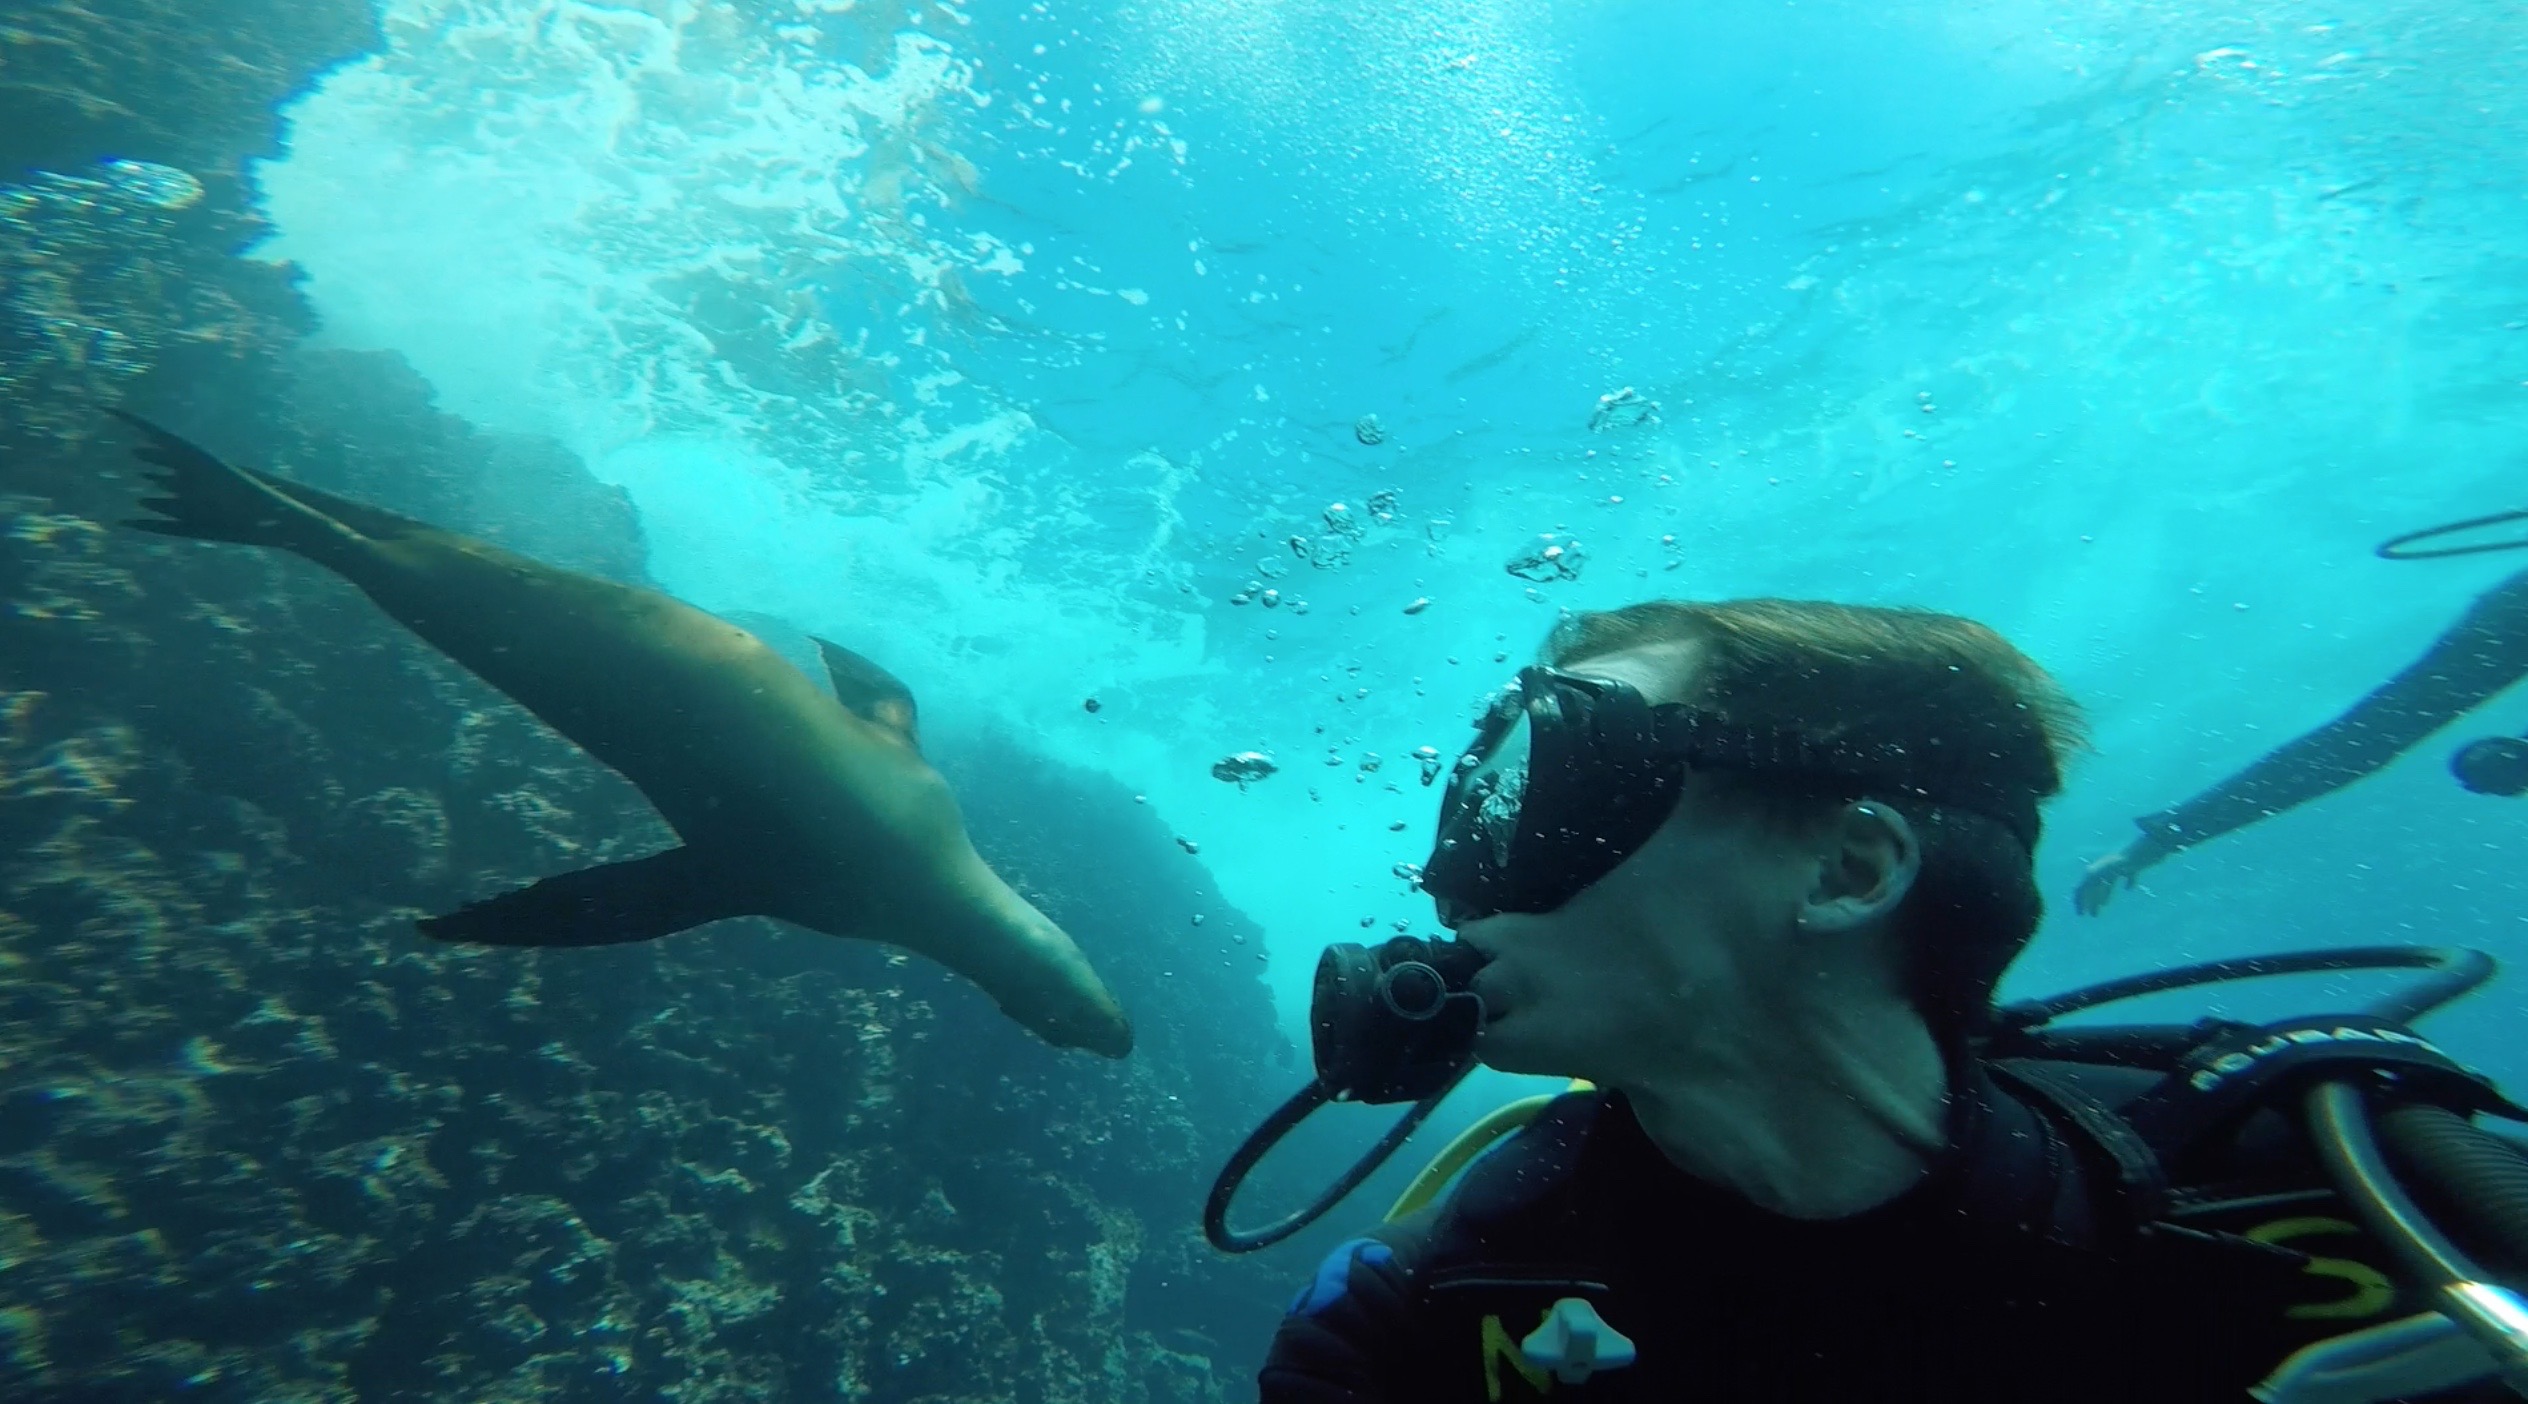 David Simpson diving with seals in Galapagos, Ecuador. Swimming with sharks in the Galapagos